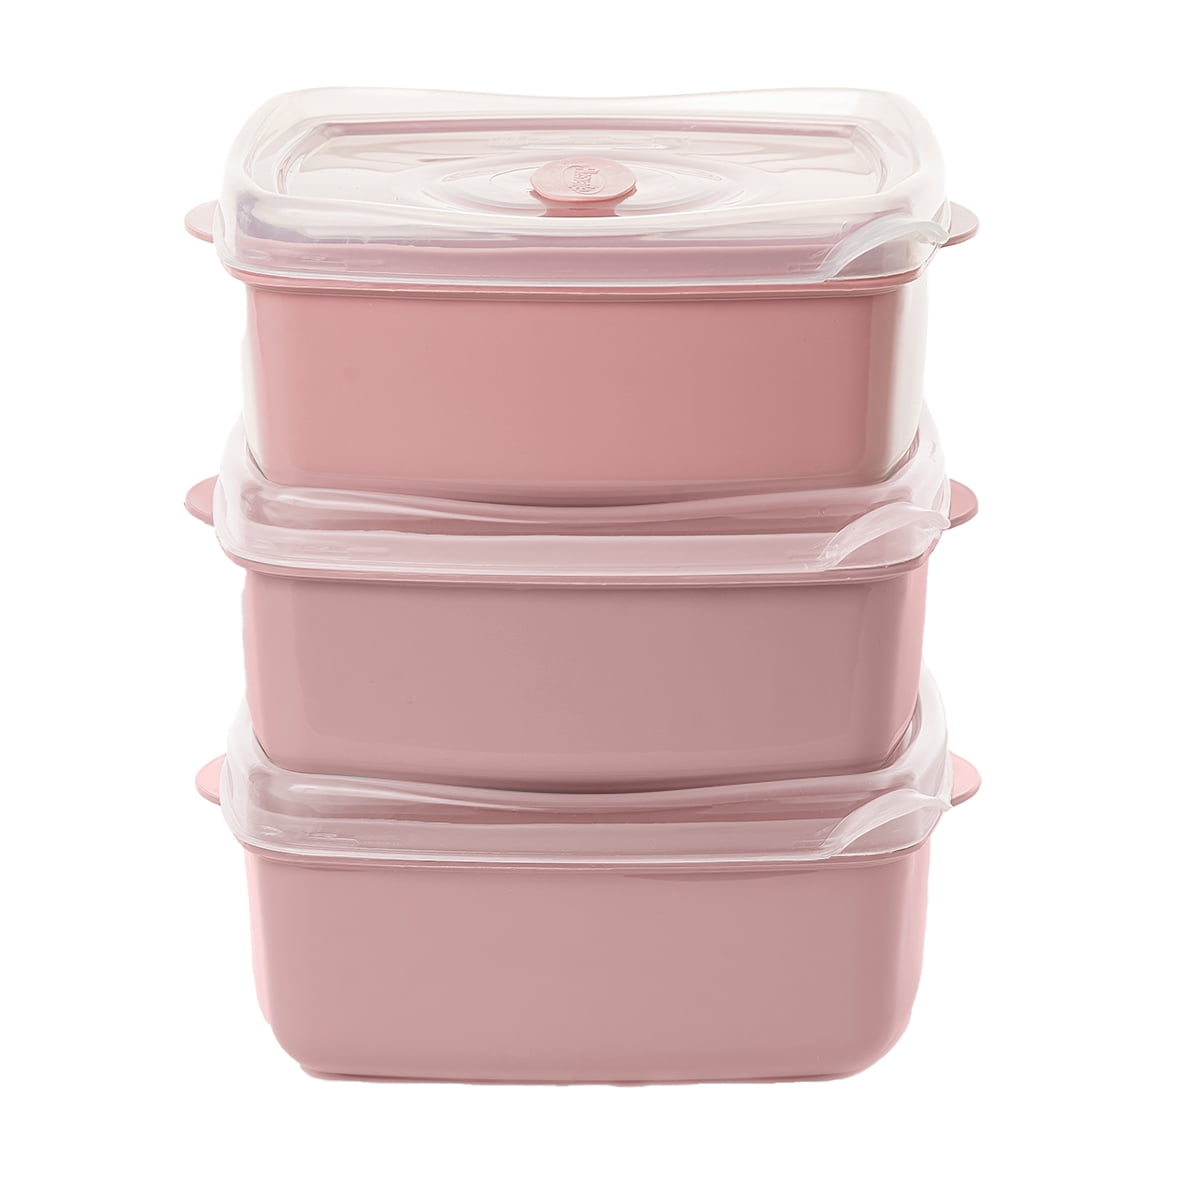 Tupperware Brand Vent ‘N Serve Container Set - 3 Small Round Containers to Prep, Freeze & Reheat Meals + Lids - Dishwasher, Microwave & Freezer Safe